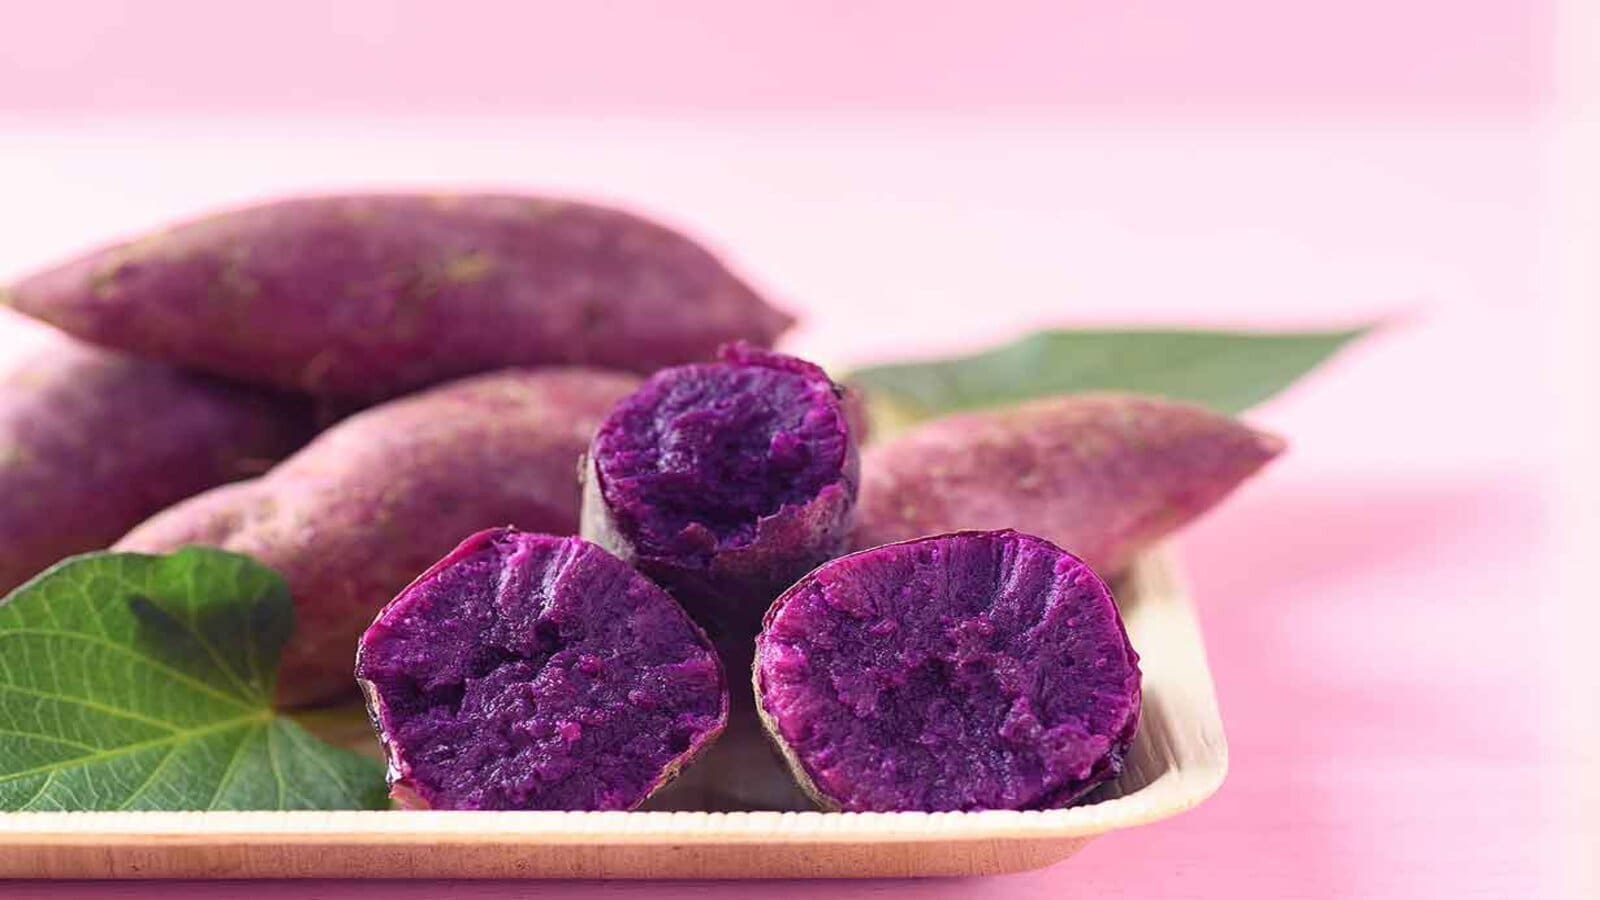 Kenyan farmers to receive new improved purple fleshed sweet potato variety